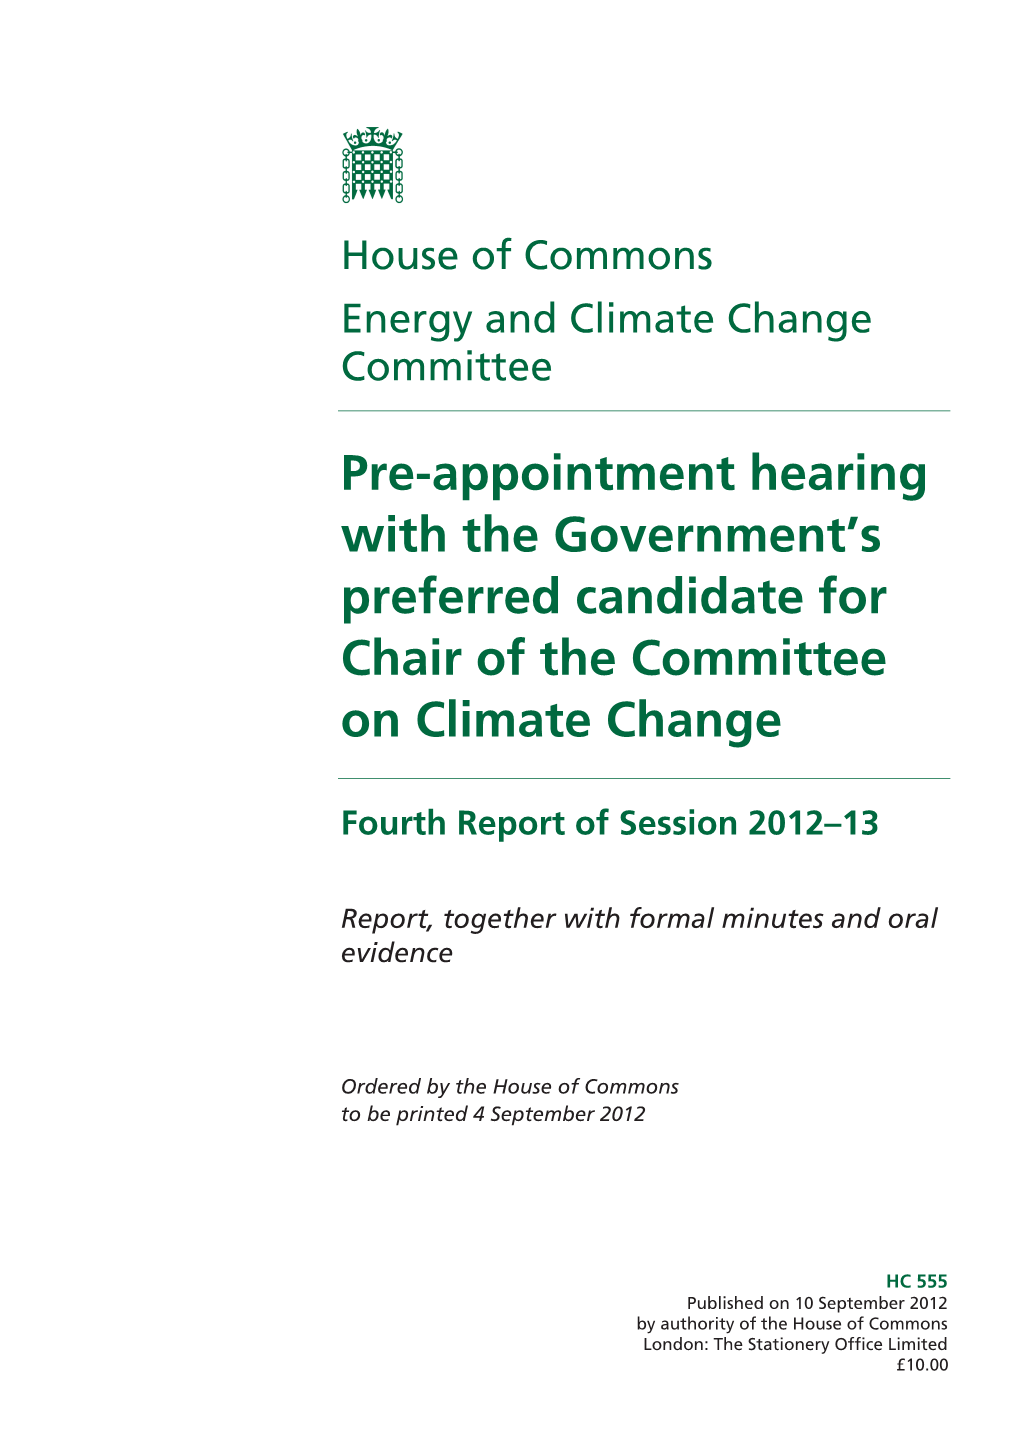 Pre-Appointment Hearing with the Government's Preferred Candidate for Chair of the Committee on Climate Change